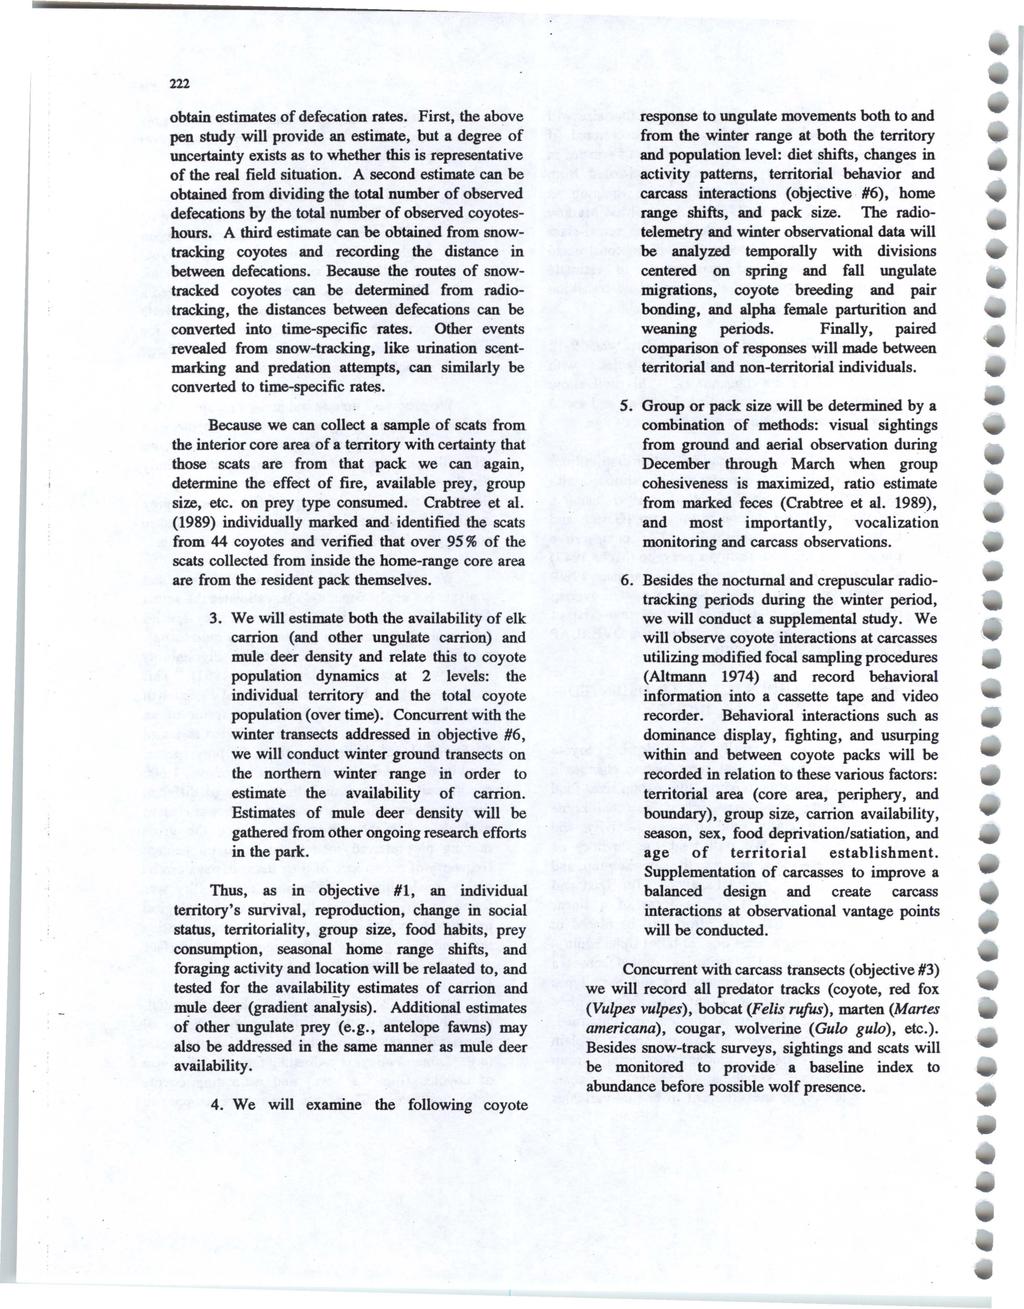 University of Wyoming National Park Service Research Center Annual Report, Vol. 15 [1991], Art. 42 222 obtain estimates of defecation rates.